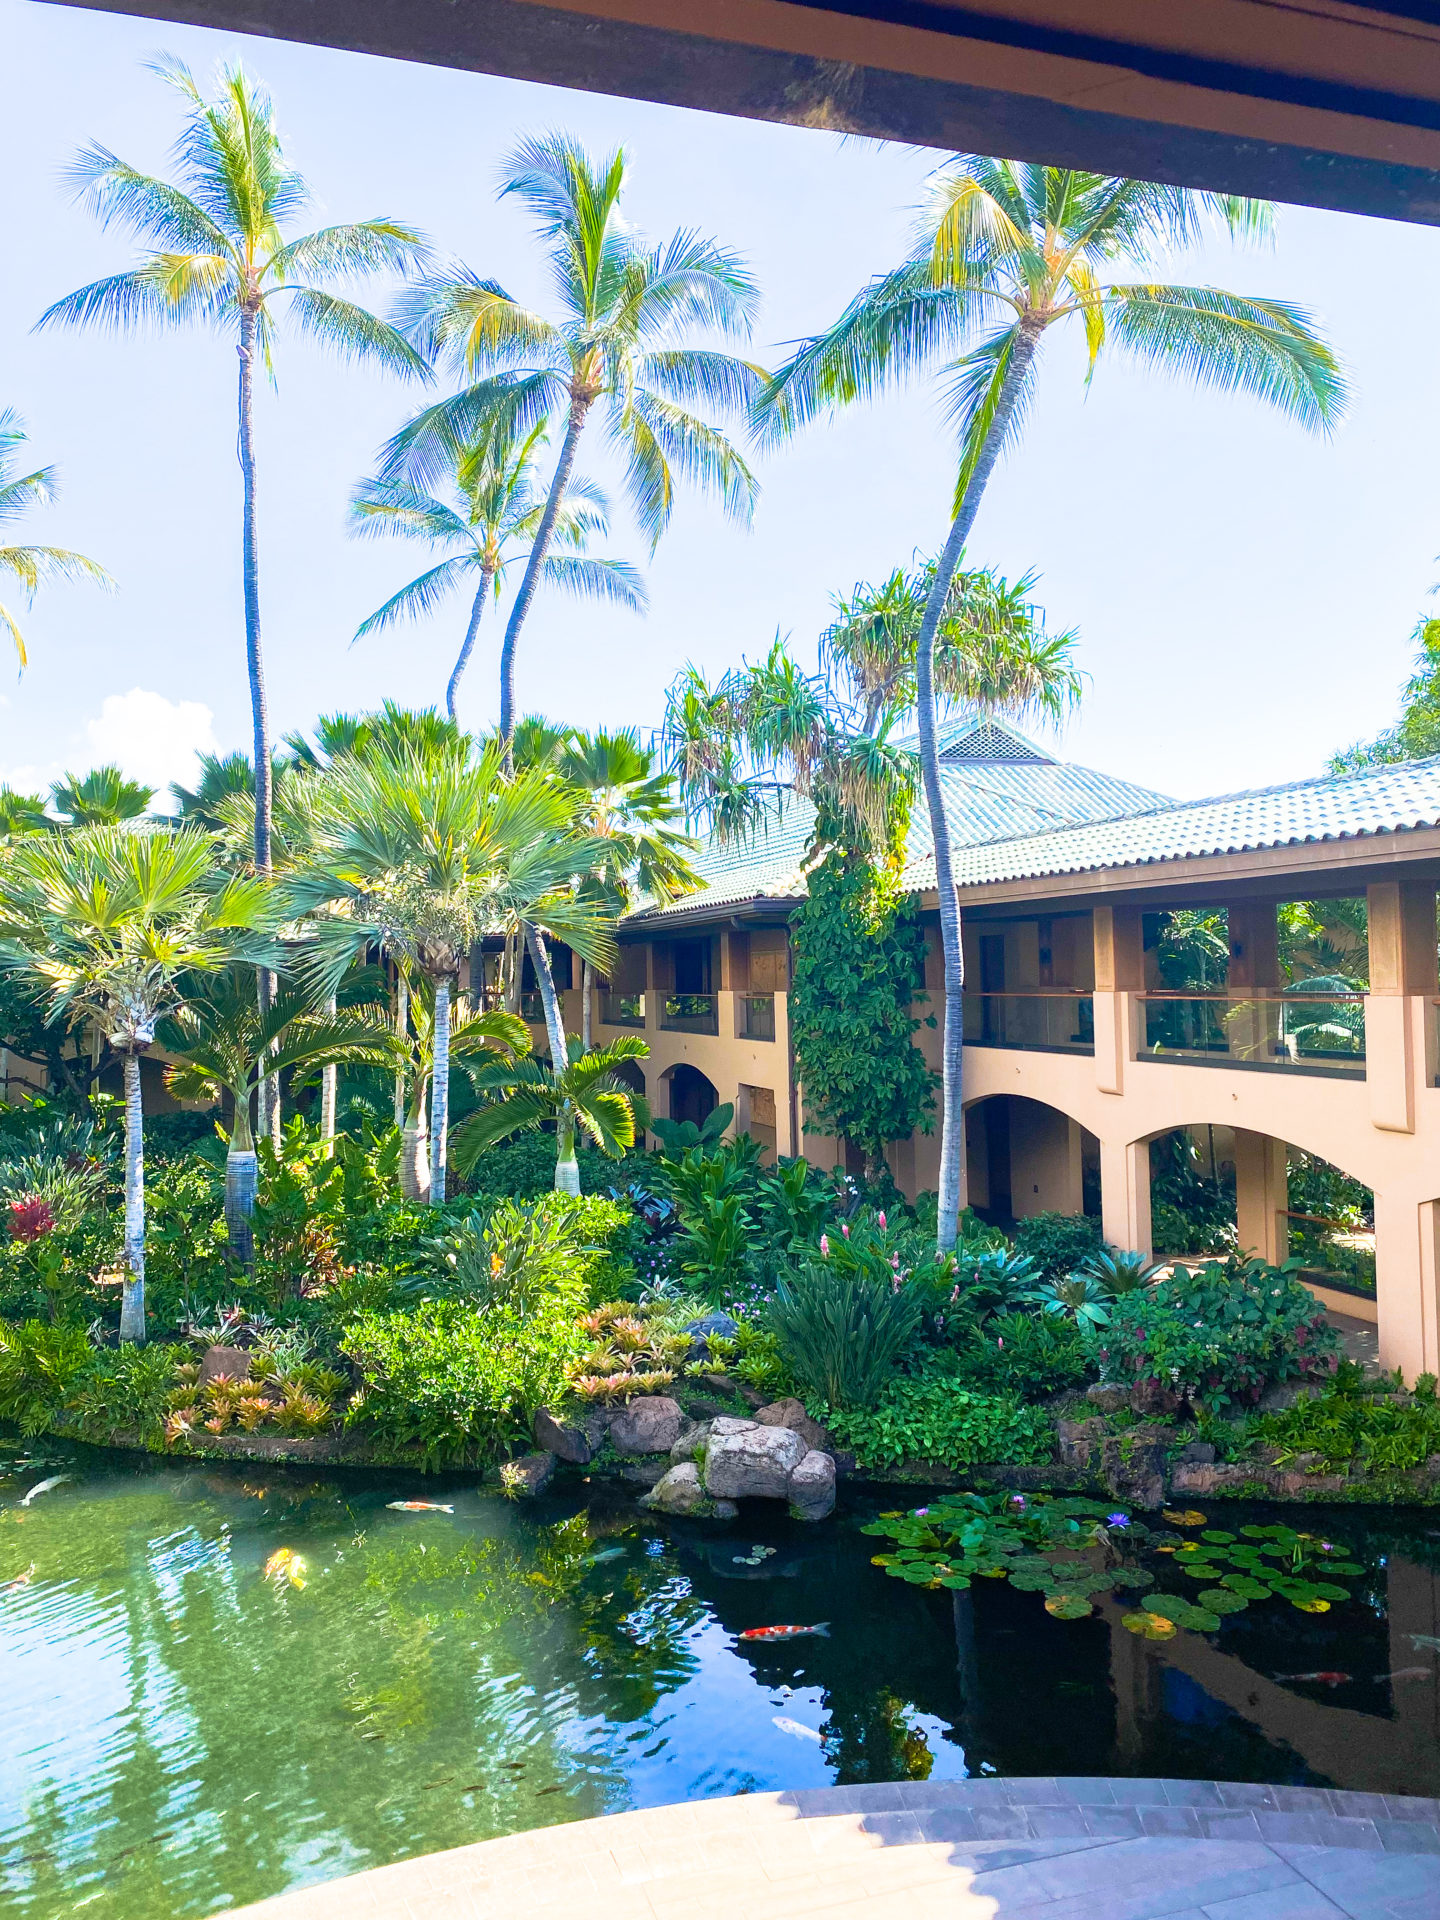 The Four Seasons lanai rooms and suites.